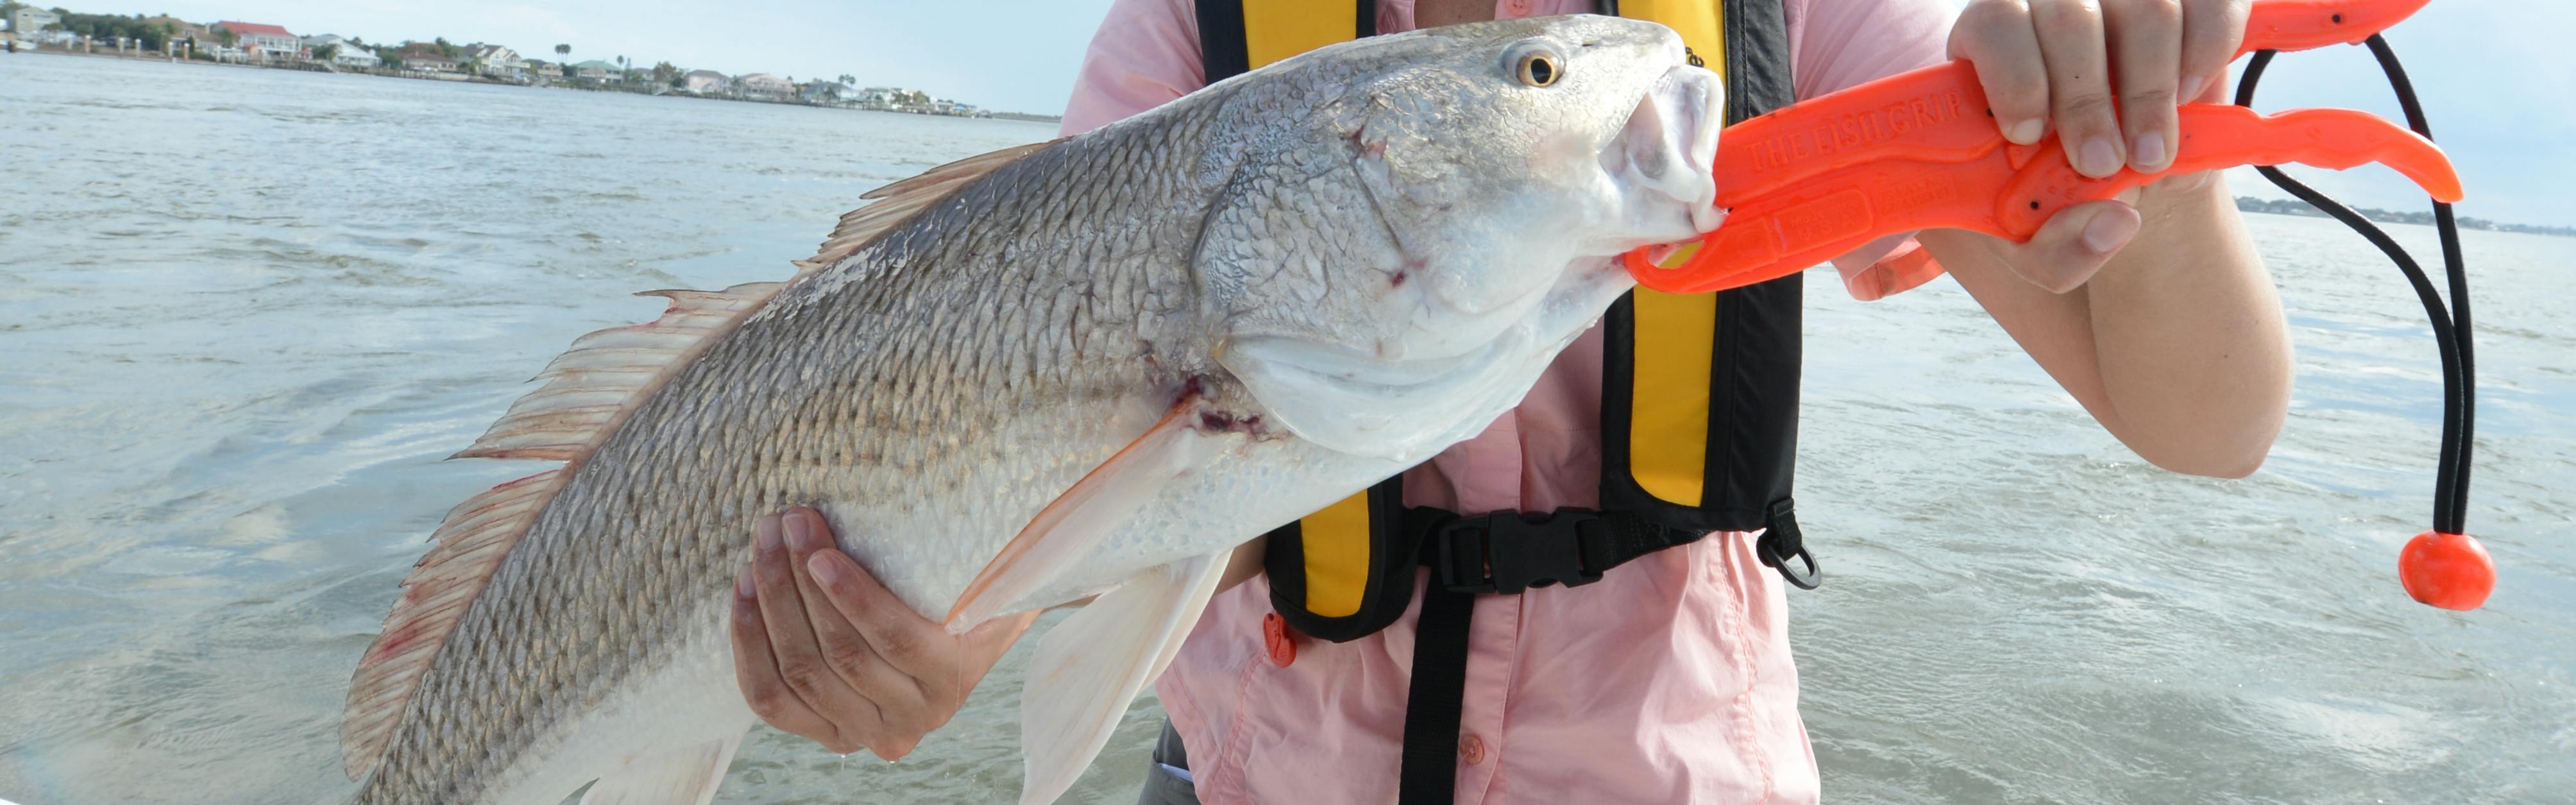 A woman wearing a PFD holds up a large redfish with plastic fish grabbers and one hand under its belly.